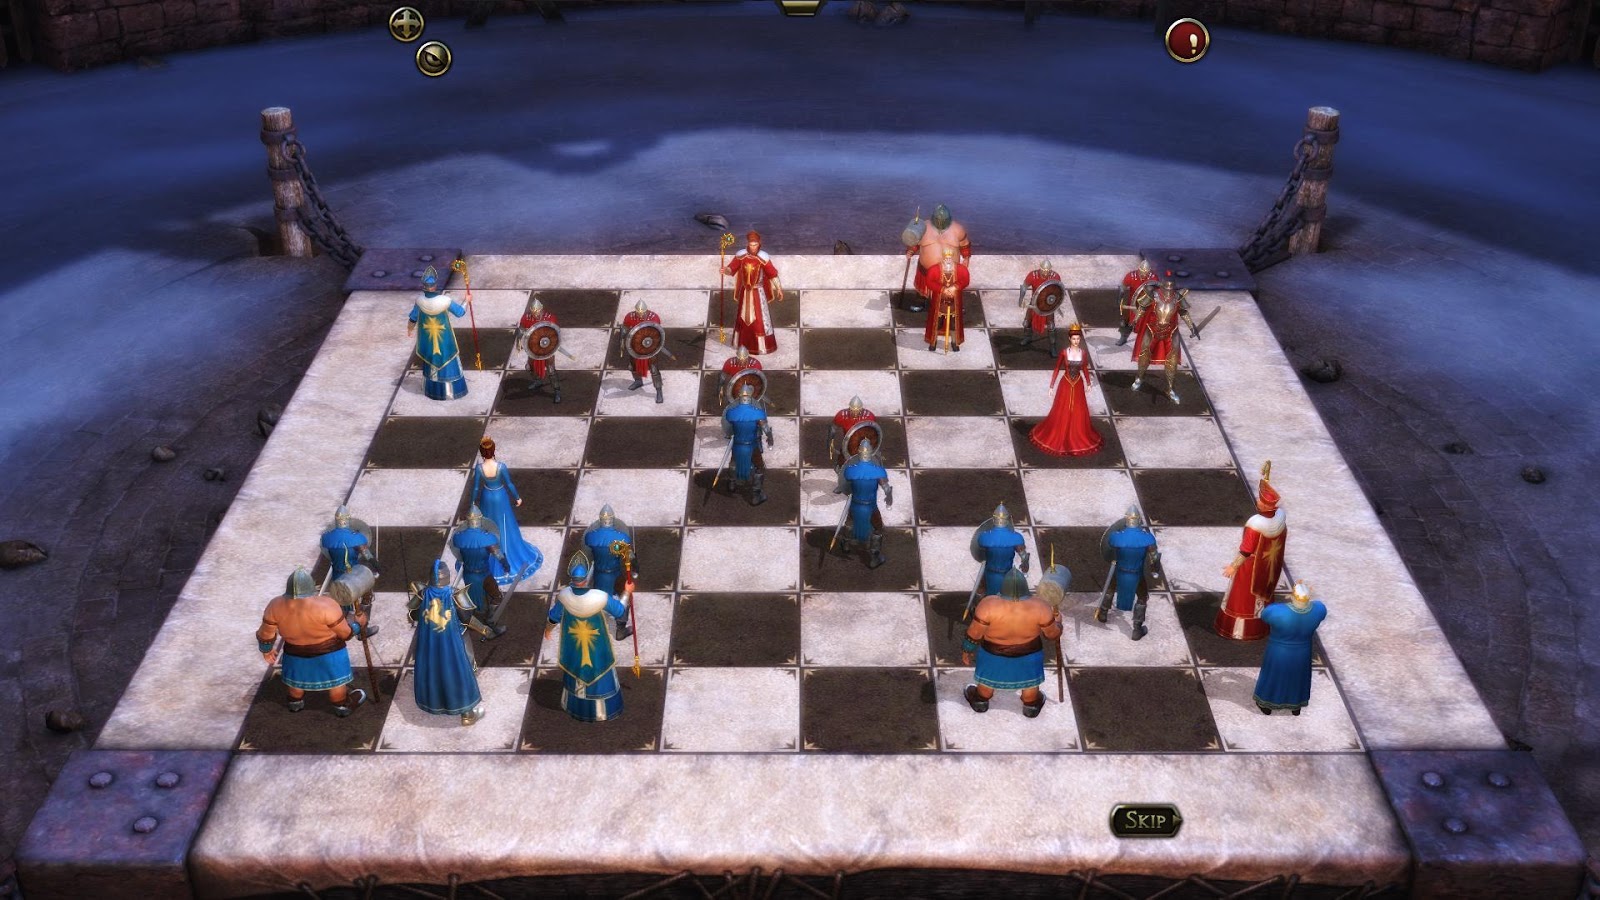 Battle chess game of kings